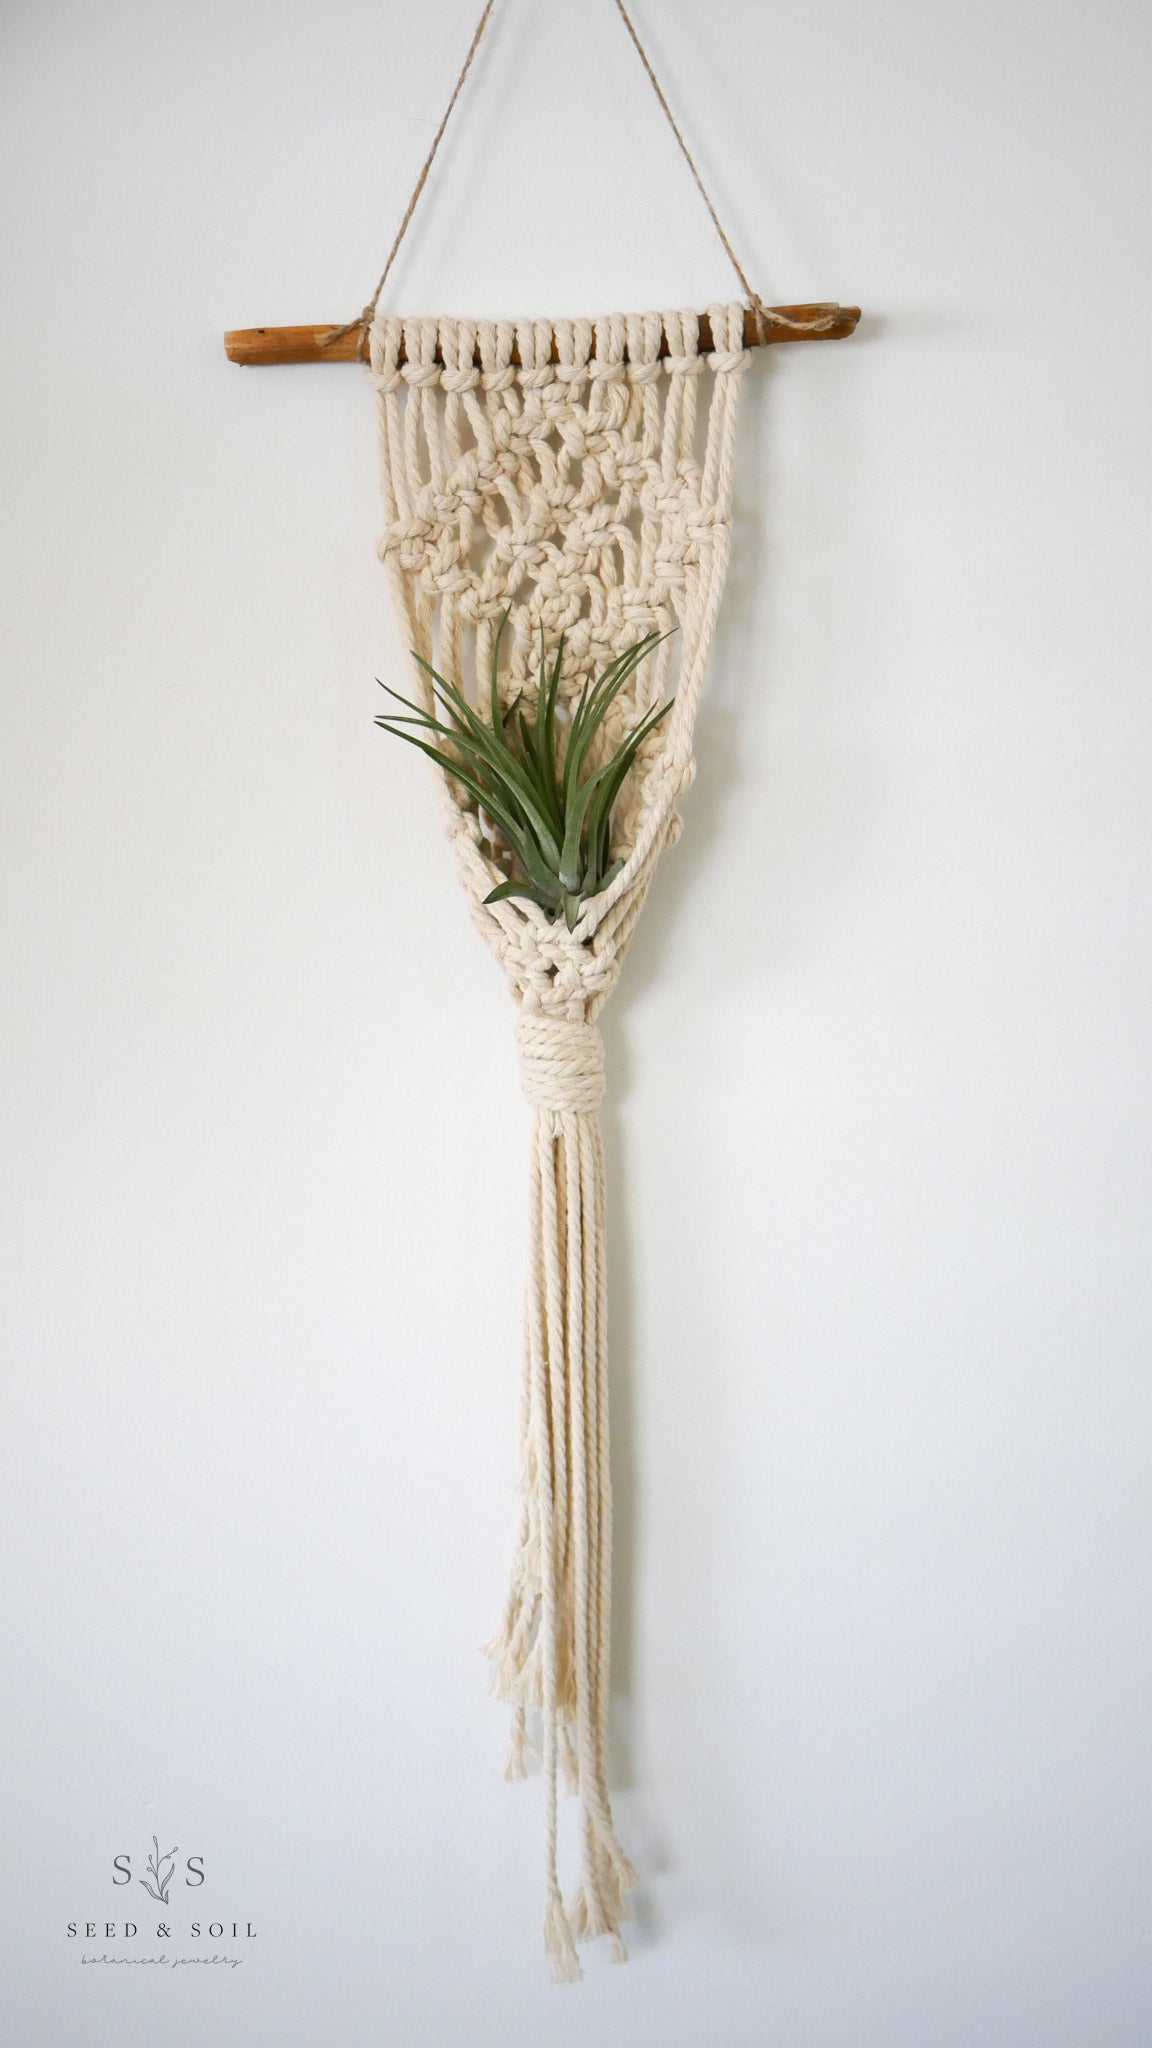 Private Group Class - Plant Macrame Class